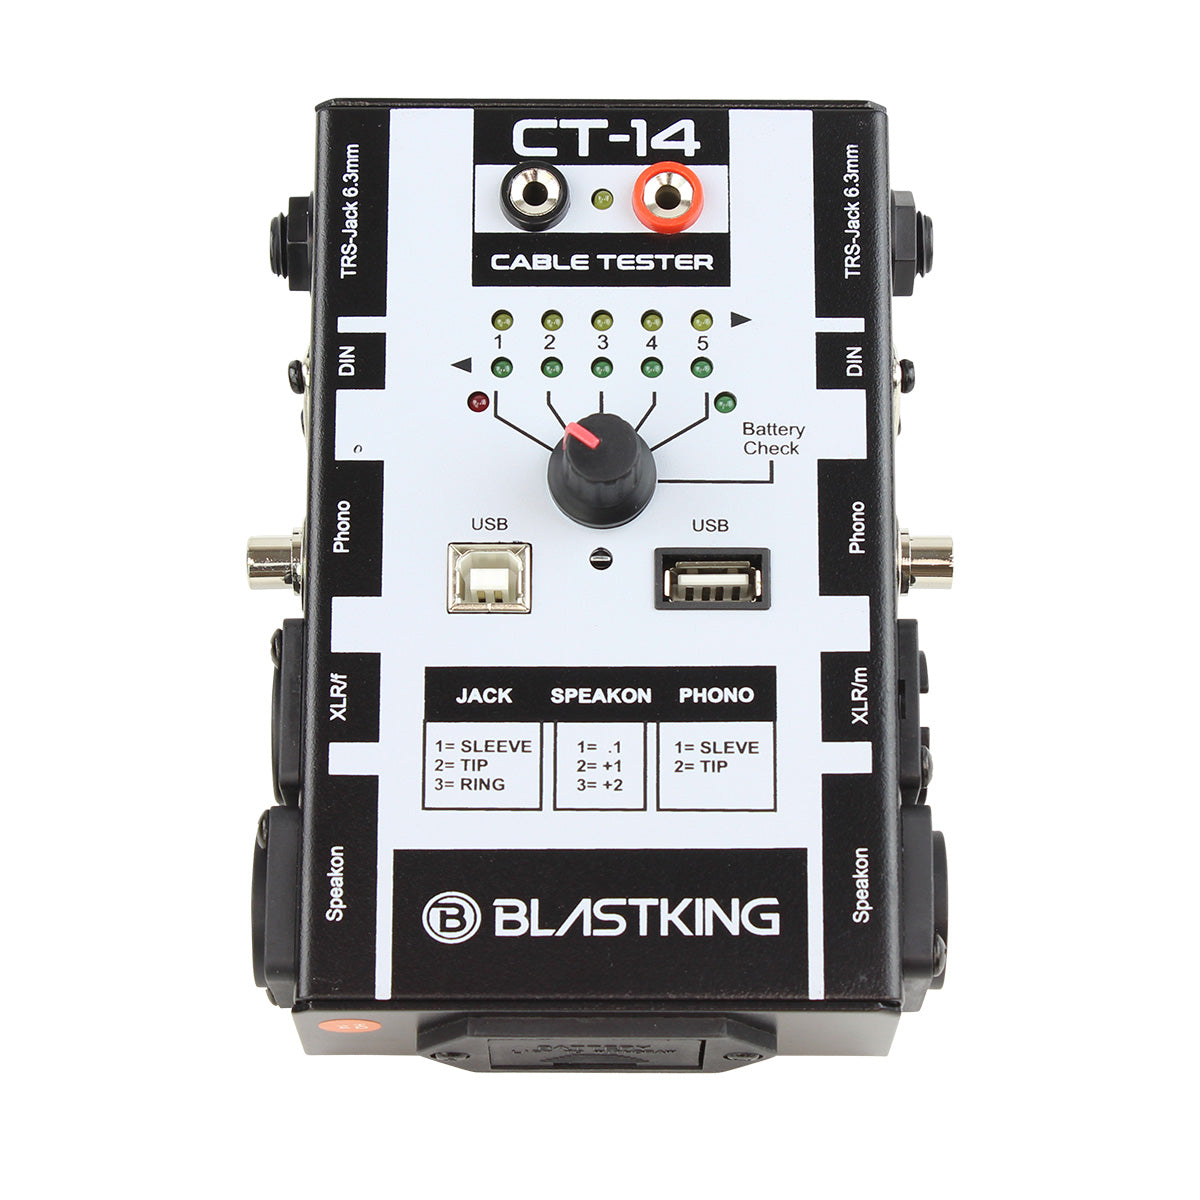 Blastking CT-14 Cable Tester